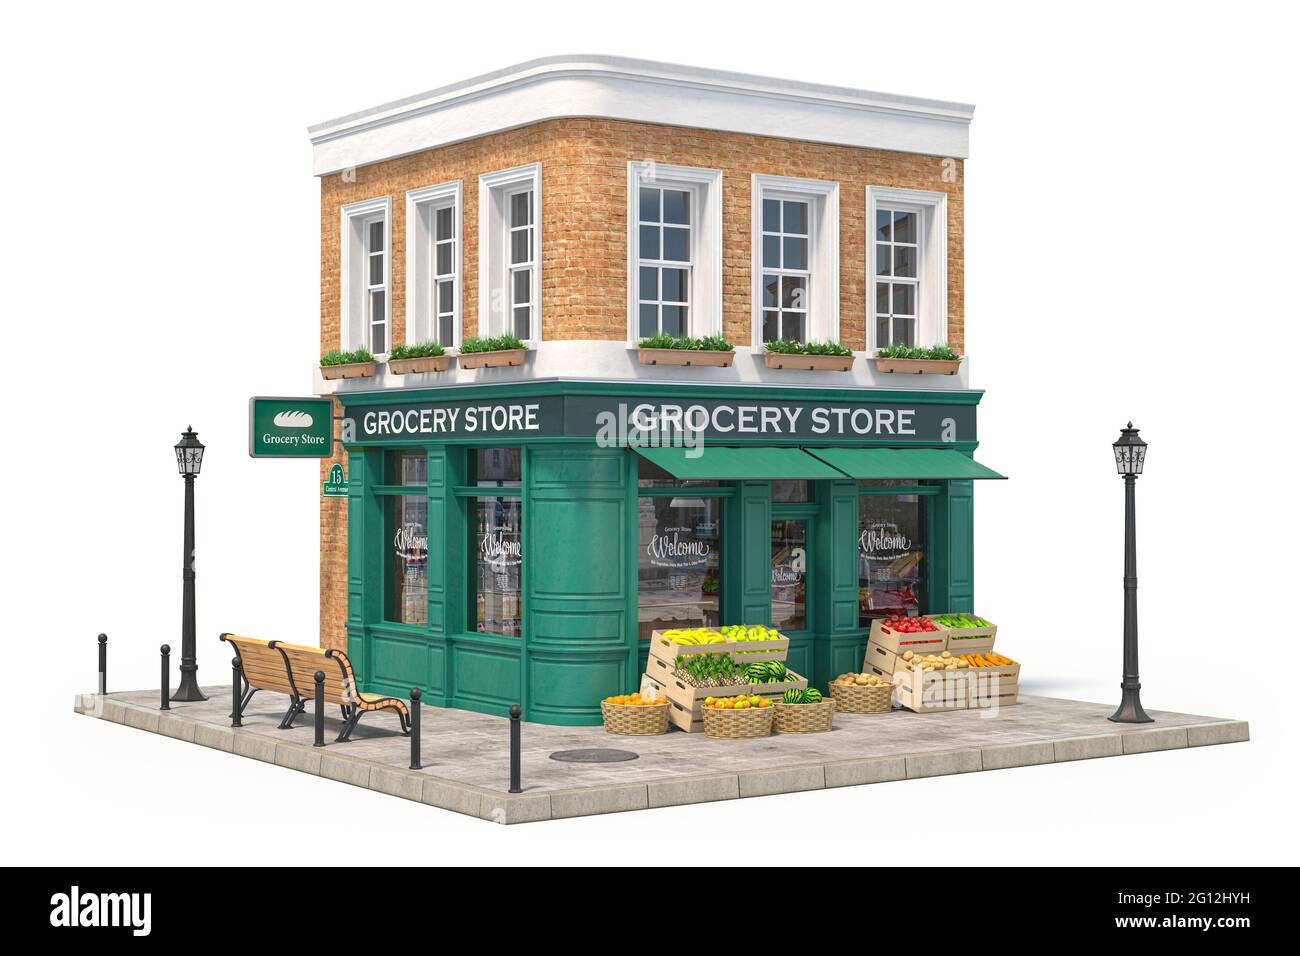 Grocery store shop in vintage style, fruit and vegetables crates on the street. 3d illustration. Stock Photo